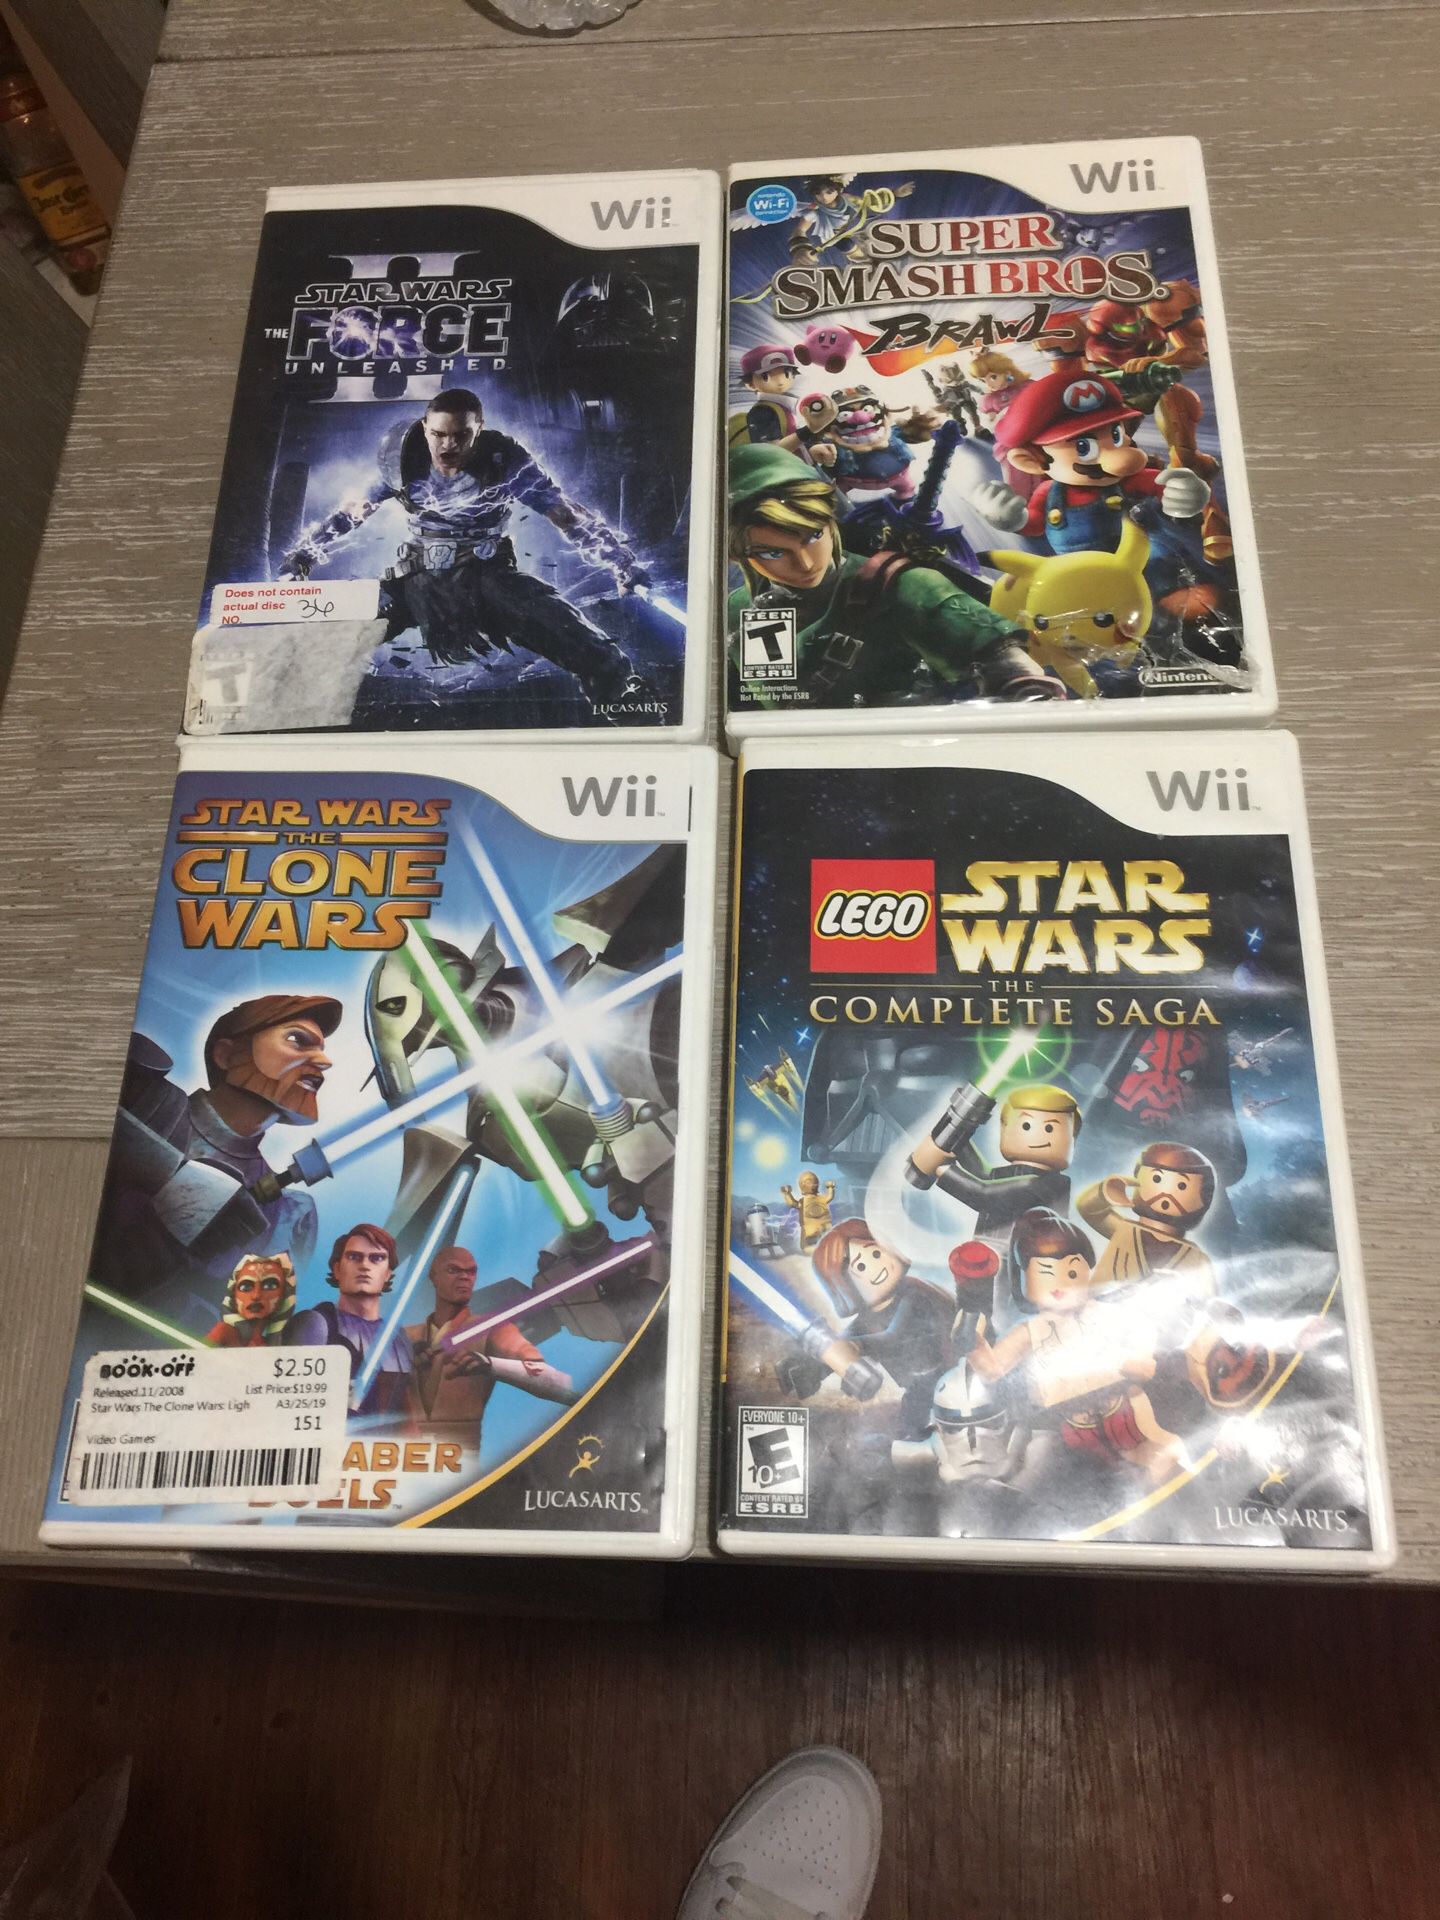 Wii super smash bros and 3 Star Wars games